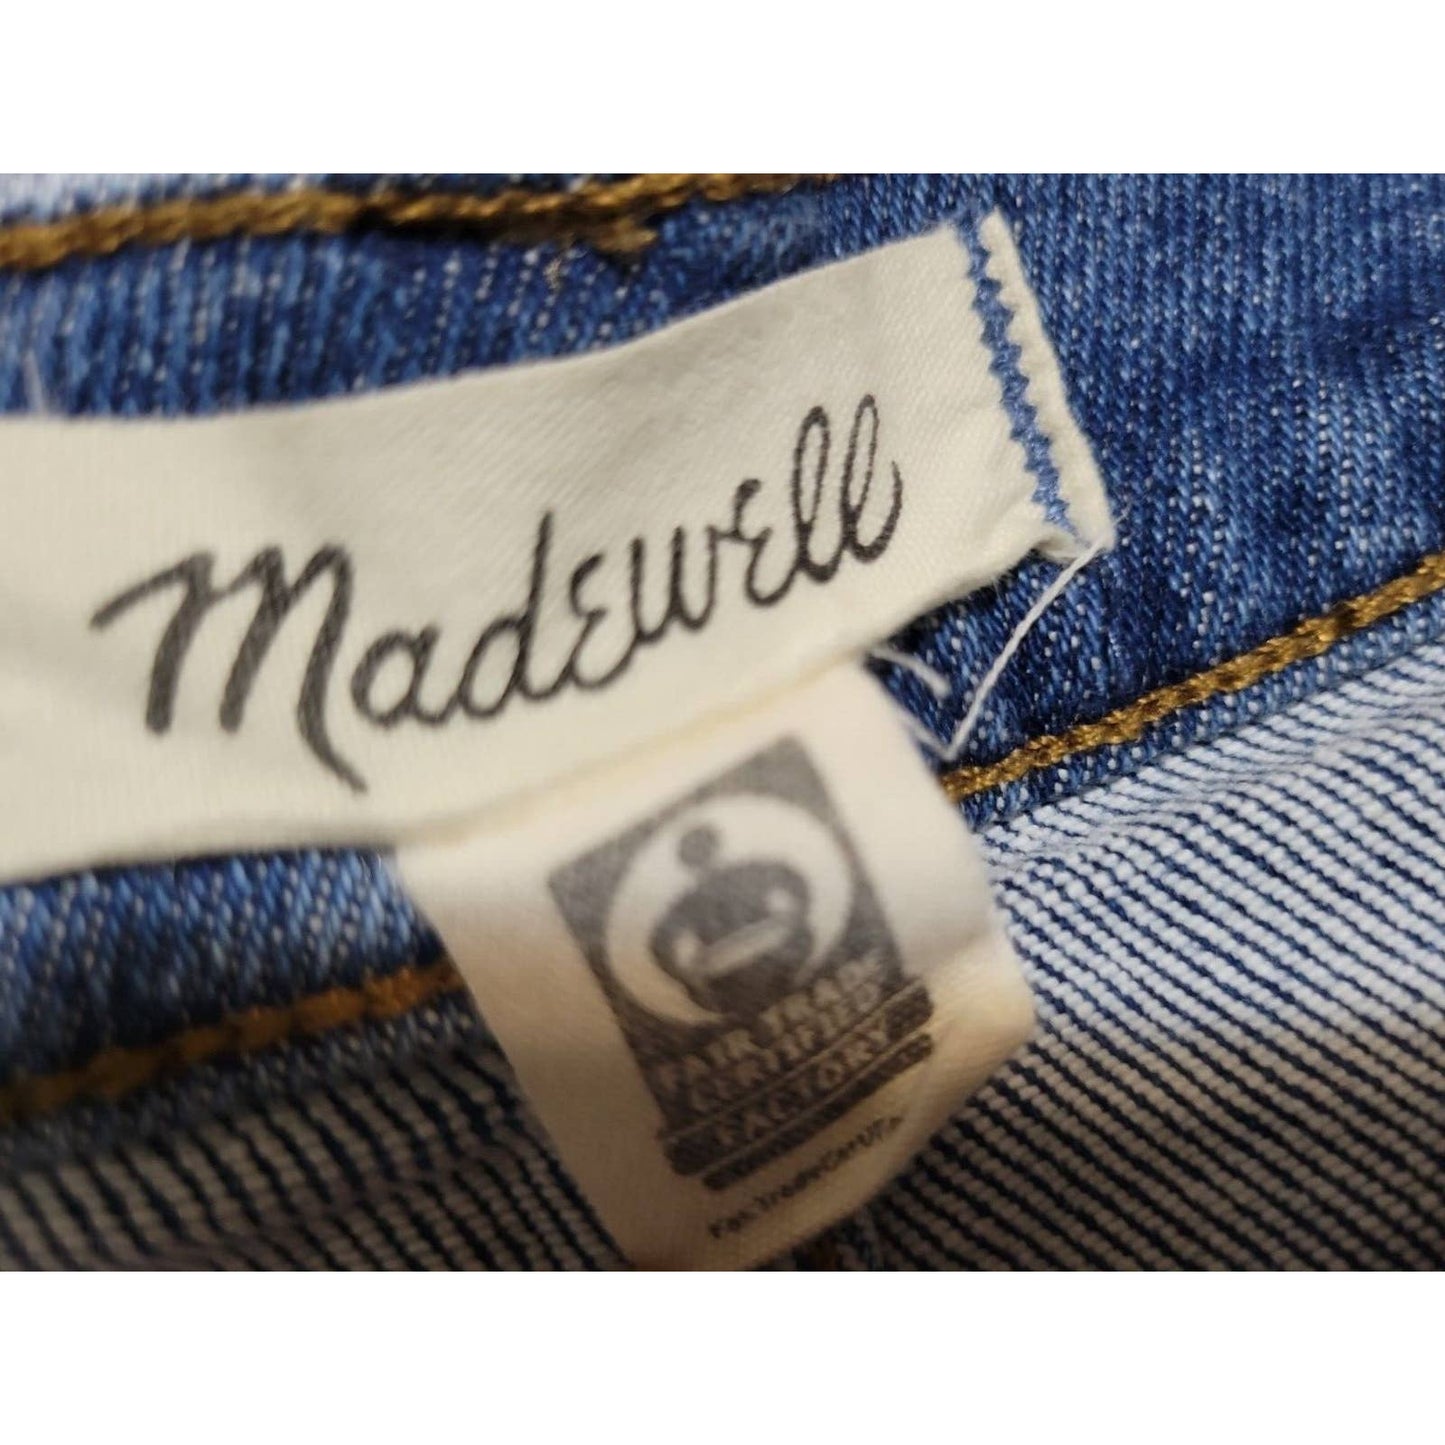 (Used) Madewell Stovepipe Jeans Women's Blue Denim High Rise Straight Size 31